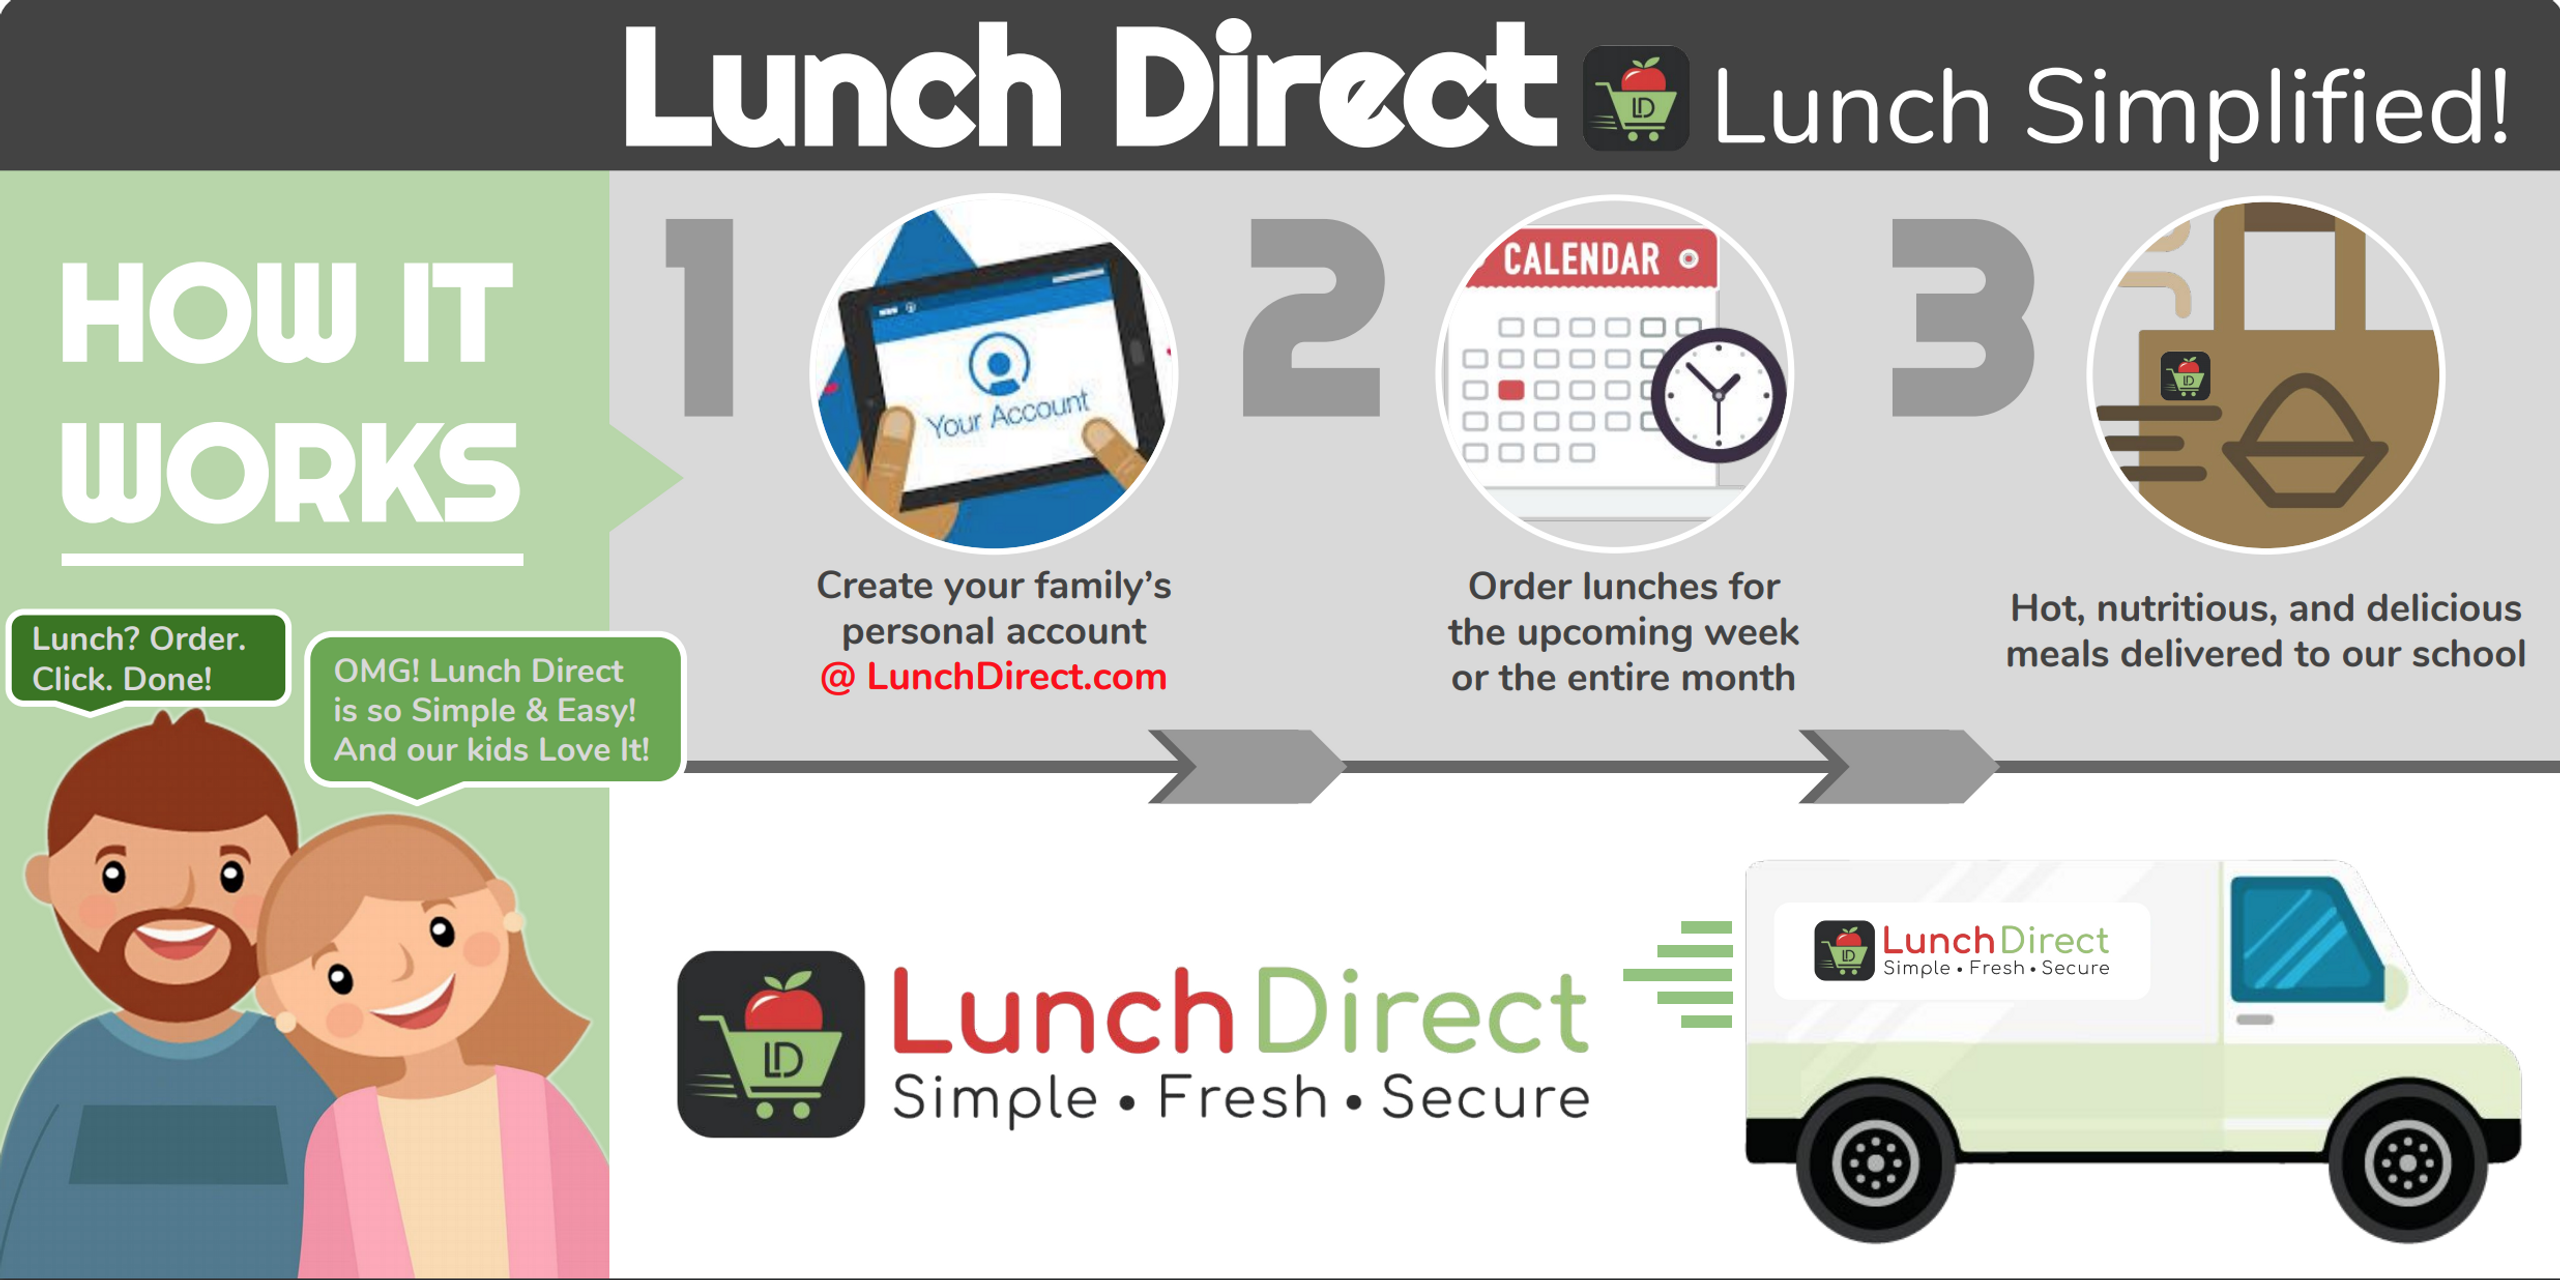 Lunch Direct